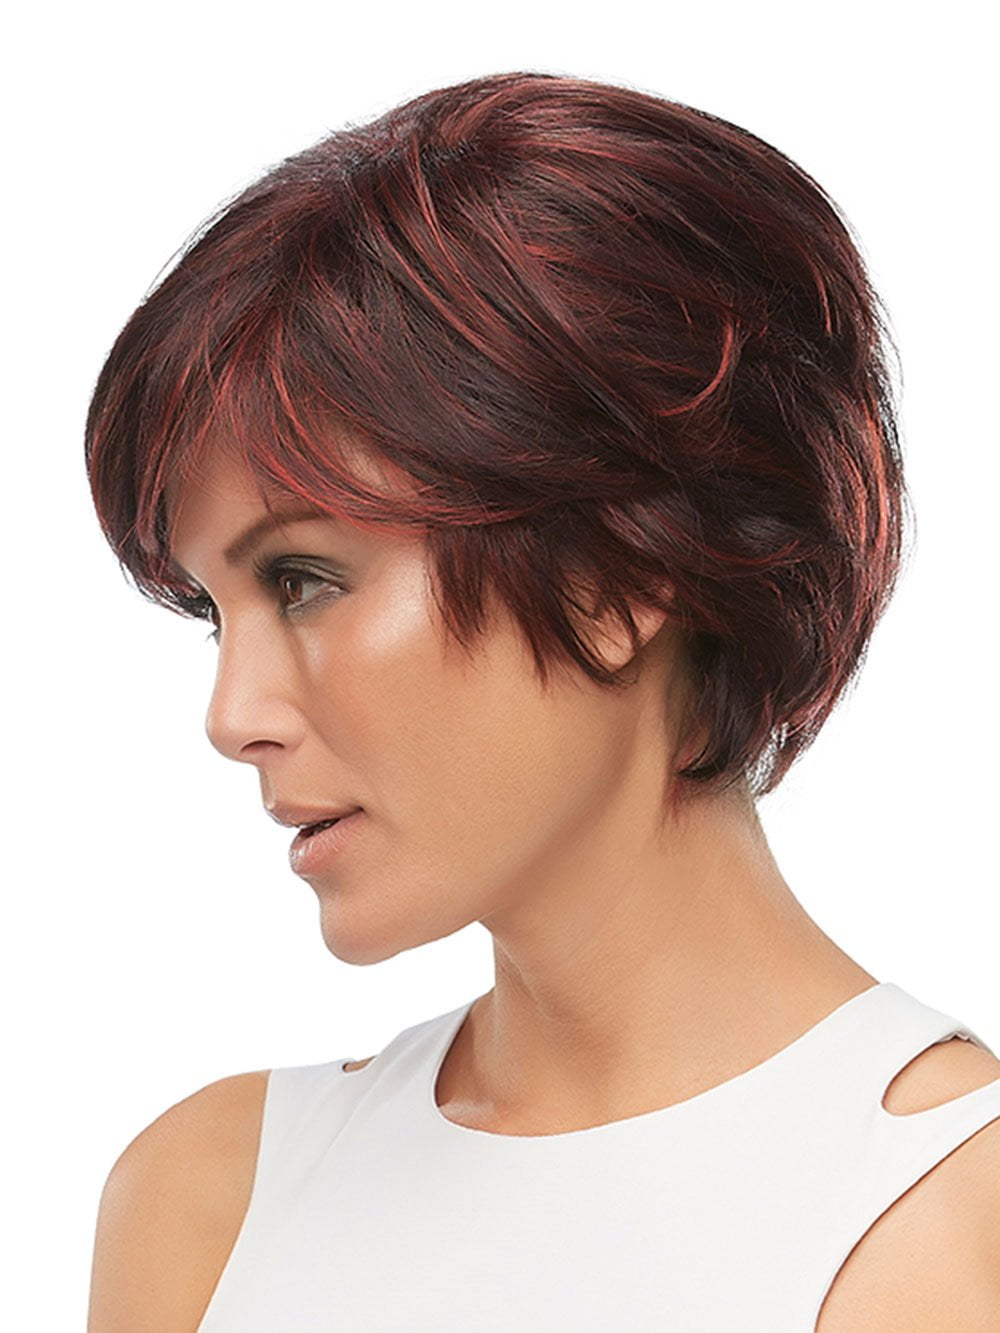 The perfect mashup of pixie shortness and long front layers!